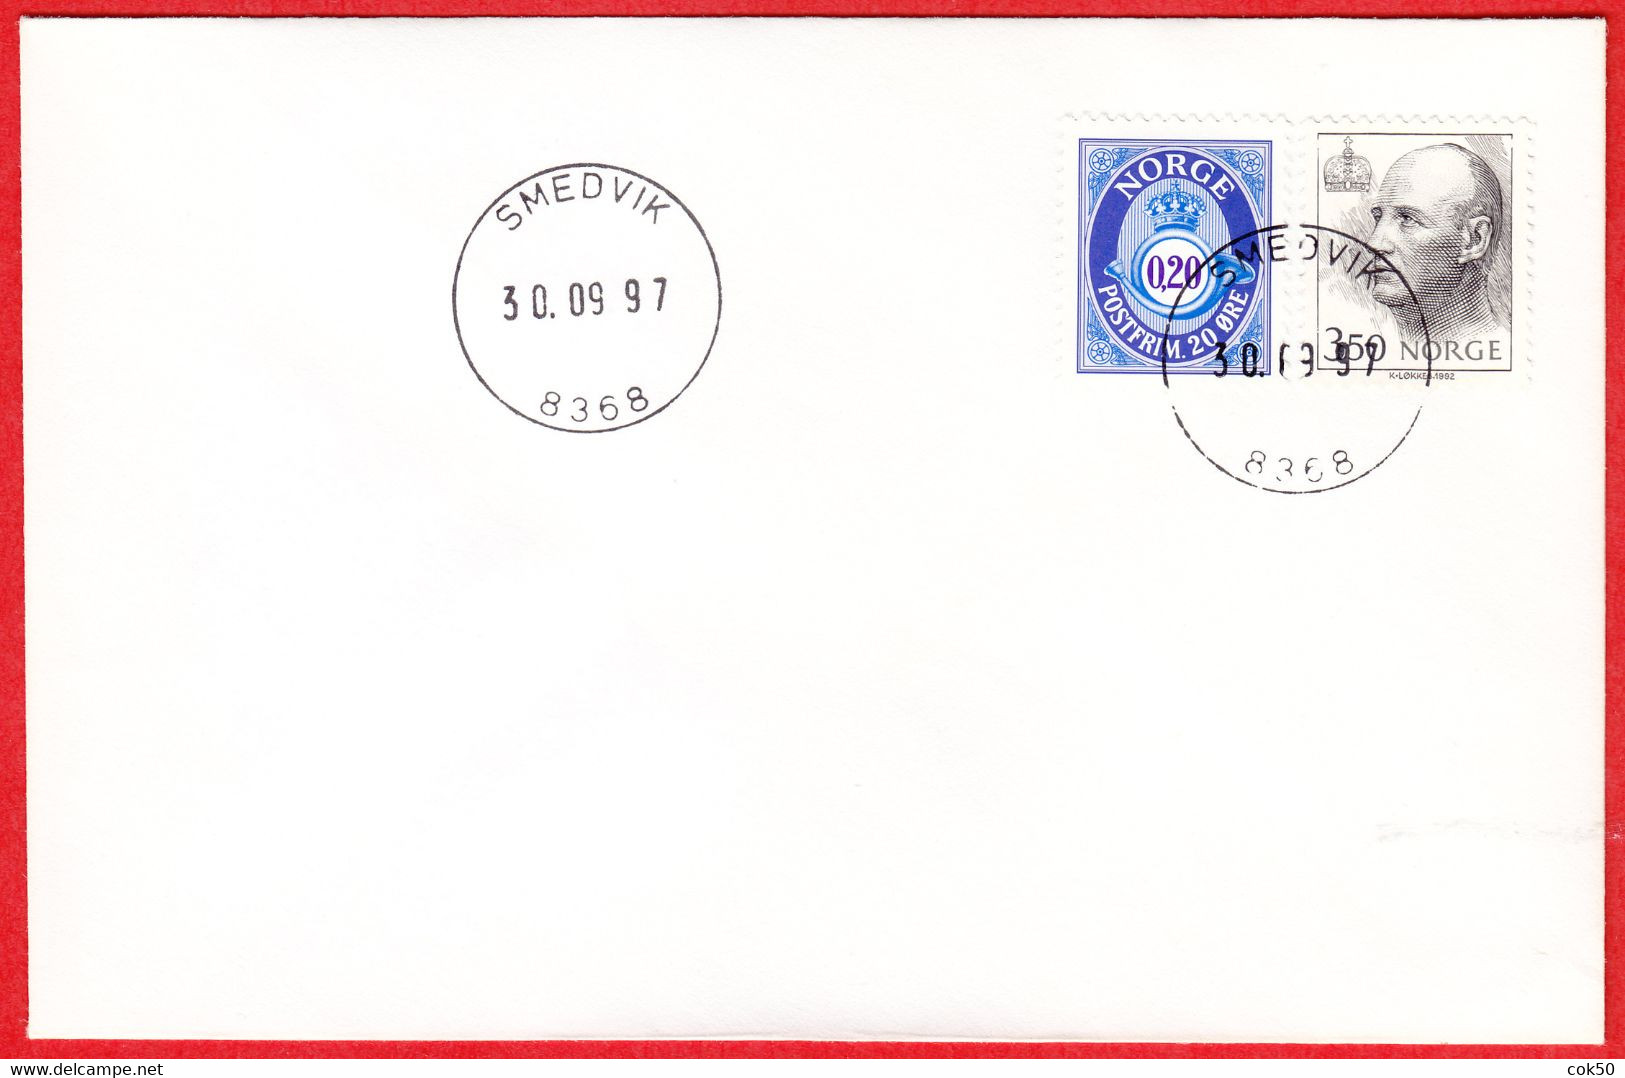 NORWAY -  8368 SMEDVIK - 24 MmØ - (Nordland County) - Last Day/postoffice Closed On 1997.09.30 - Local Post Stamps